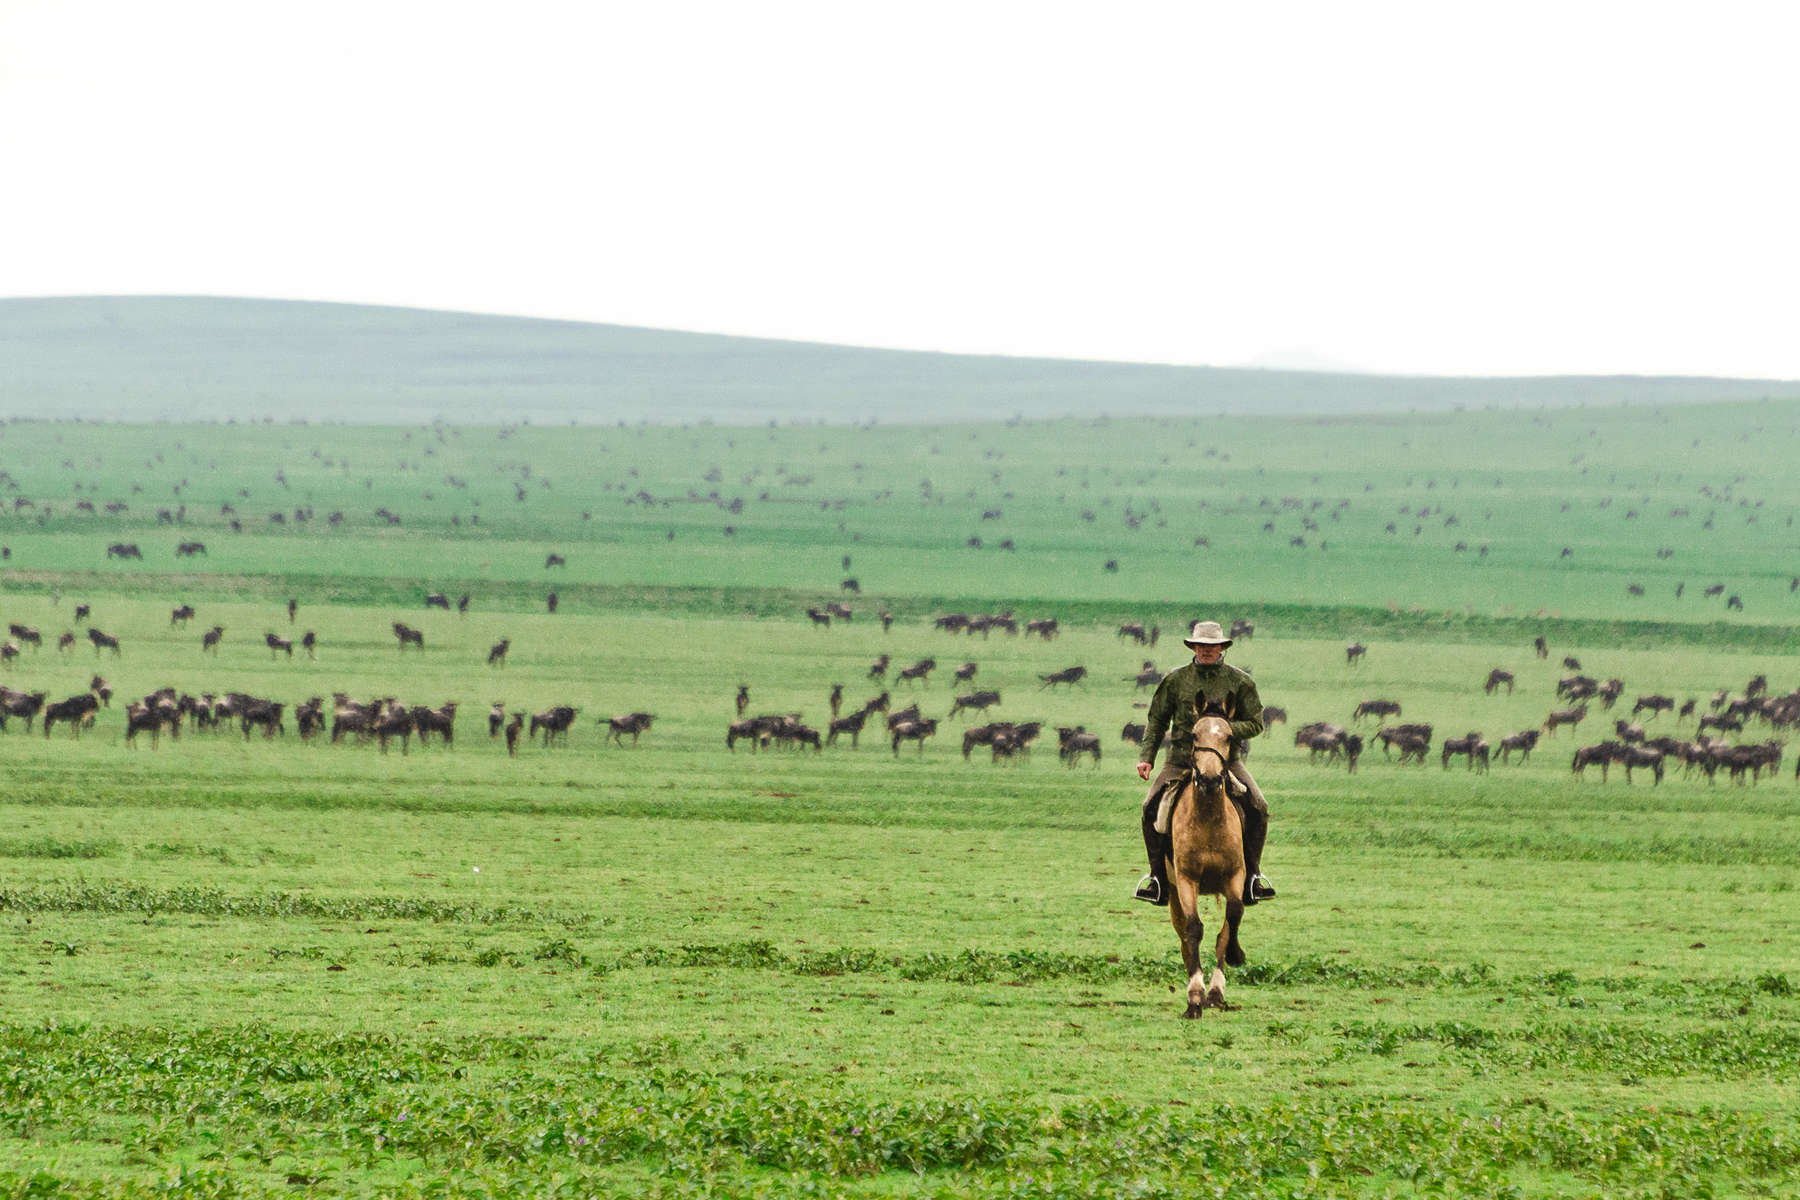 The Seregenti plains dotted with wildebeest